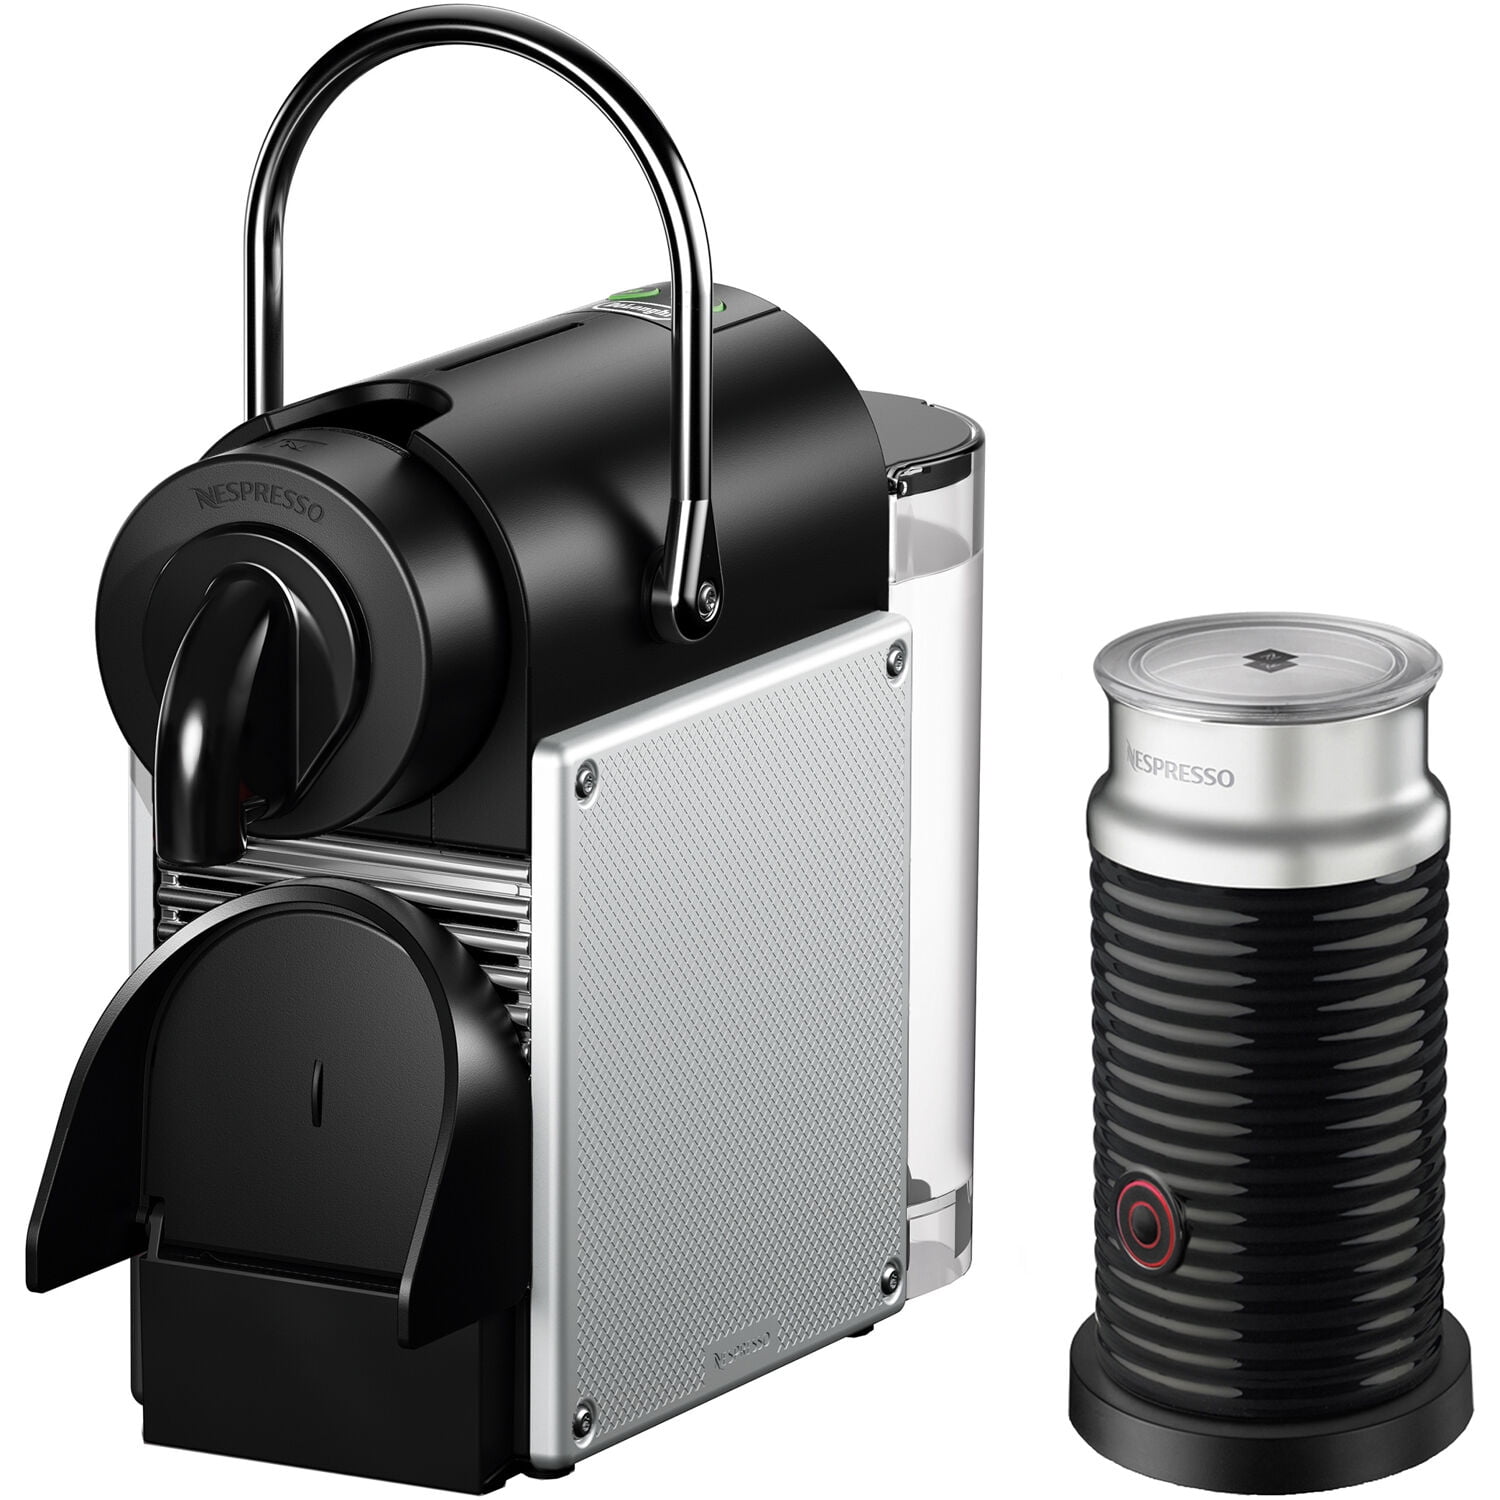 Aeroccino 3 vs 4: What's The Better Nespresso Milk Frother? 